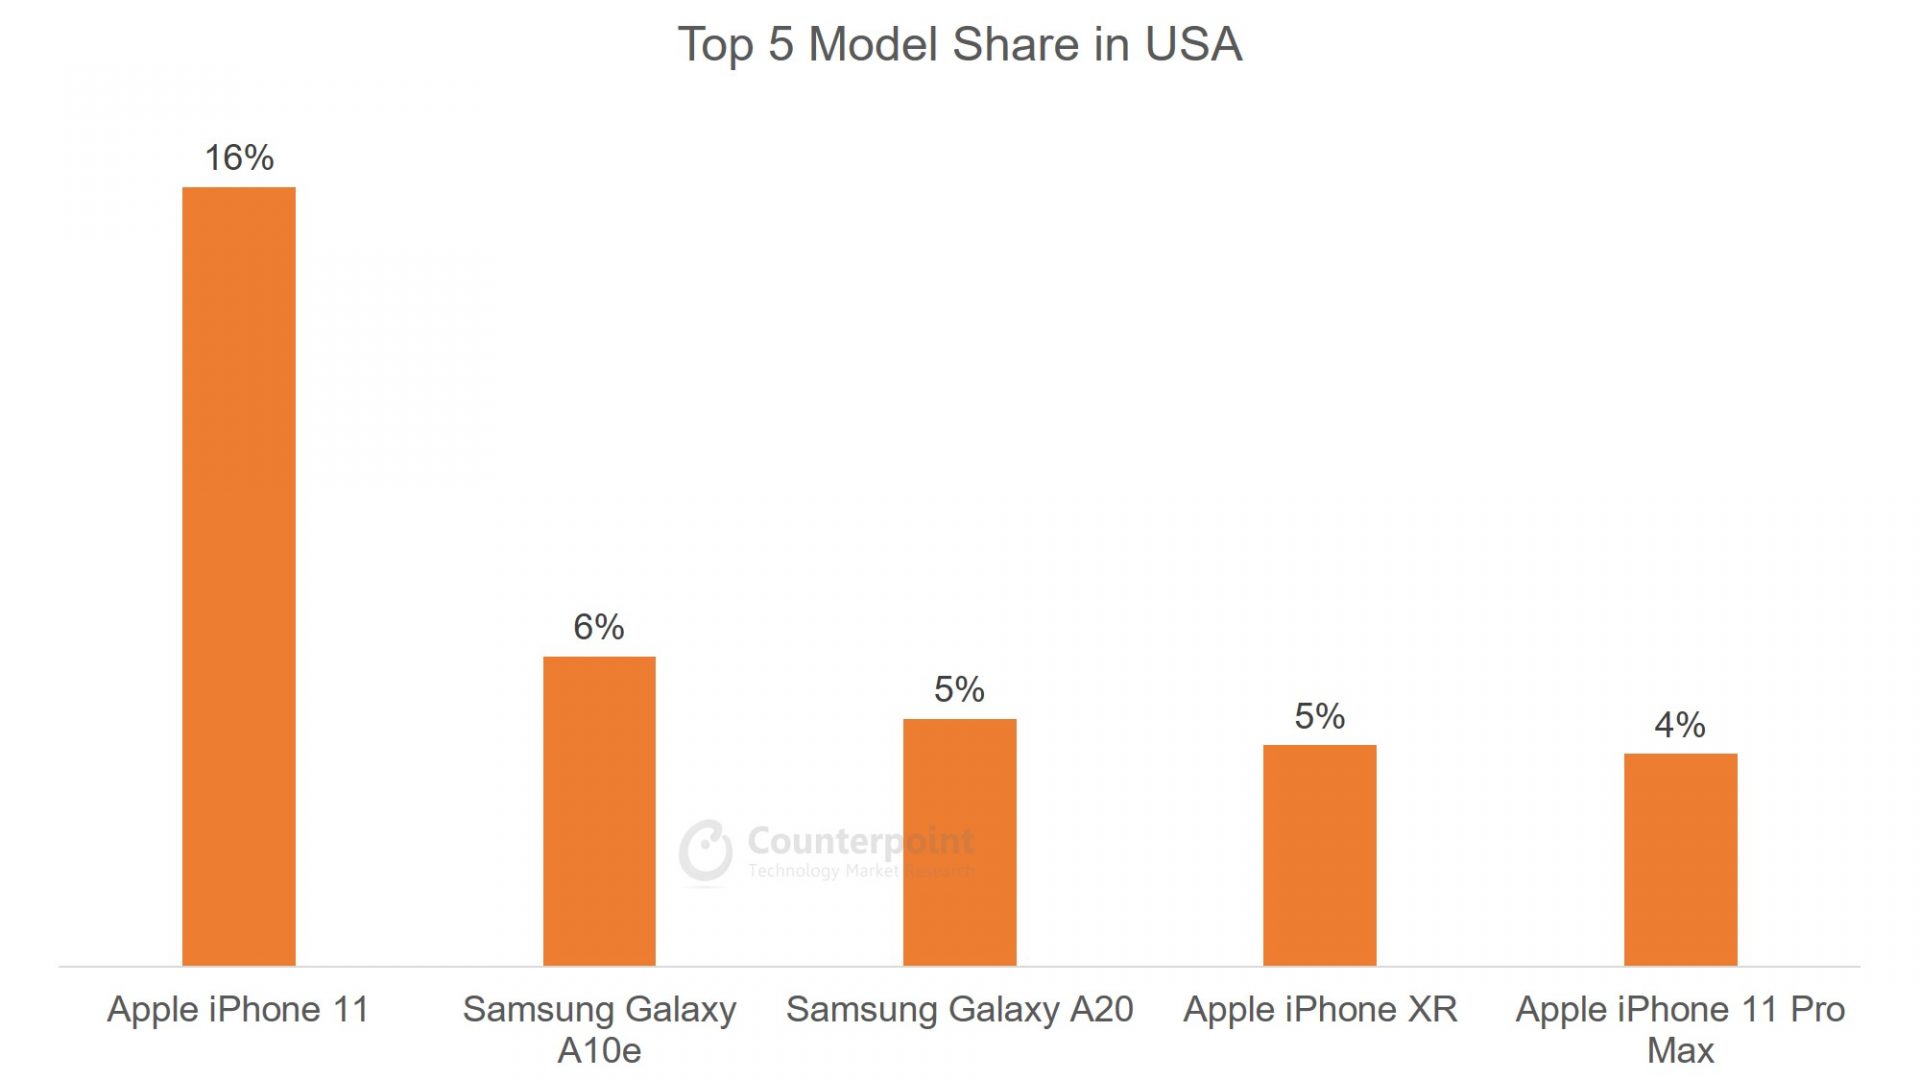 Counterpoint: (Apr 2020) Top 5 Smartphone Model Share in USA